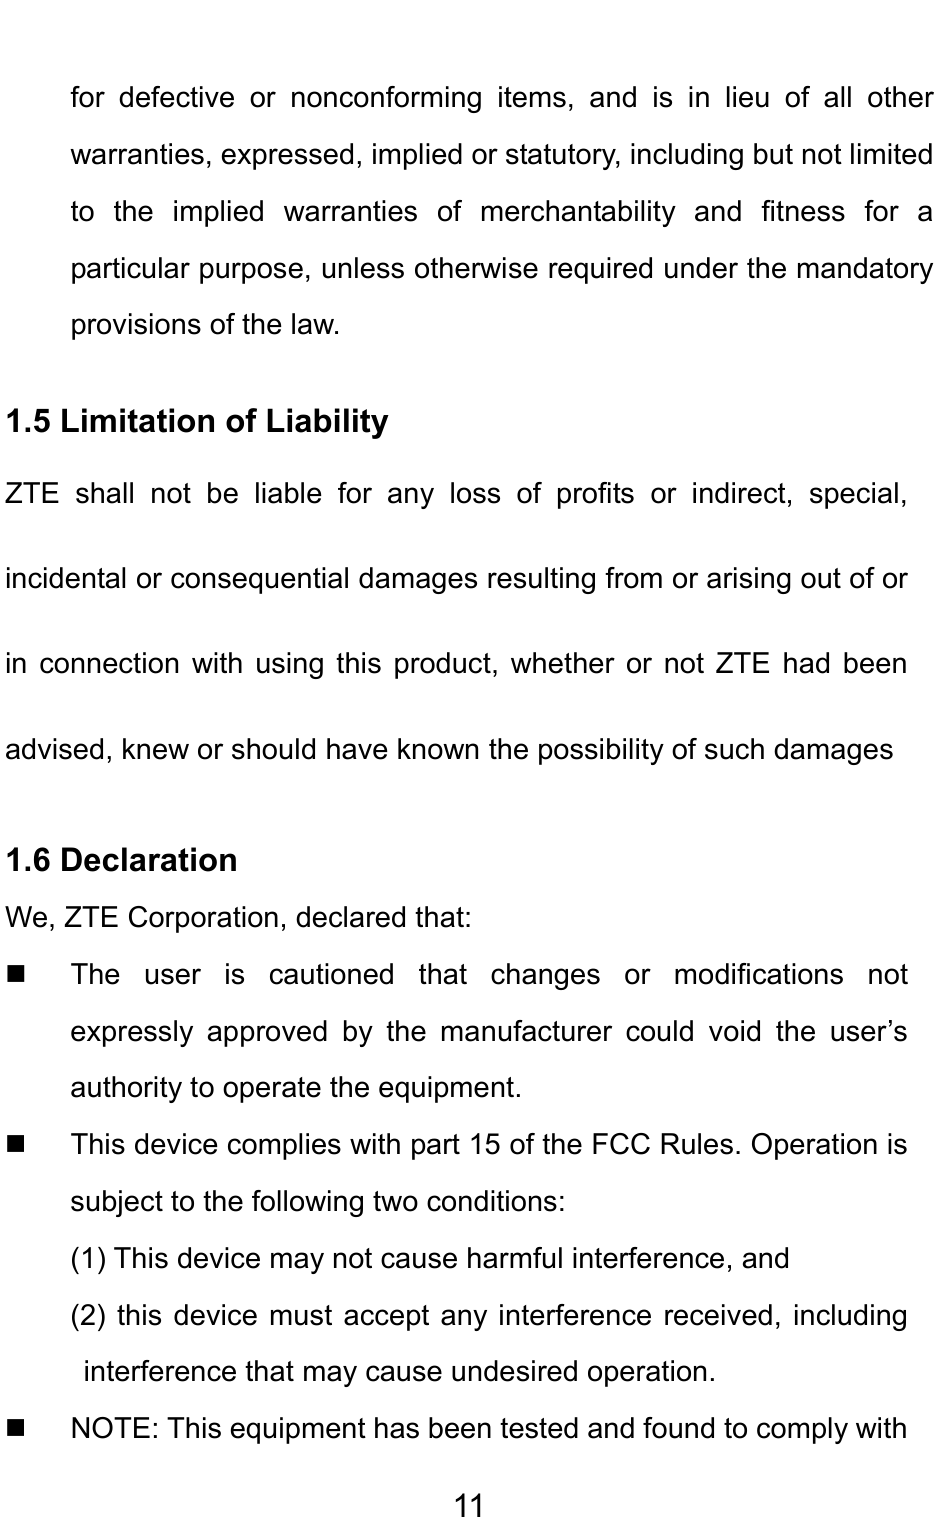                                     11for defective or nonconforming items, and is in lieu of all other warranties, expressed, implied or statutory, including but not limited to the implied warranties of merchantability and fitness for a particular purpose, unless otherwise required under the mandatory provisions of the law.   1.5 Limitation of Liability ZTE shall not be liable for any loss of profits or indirect, special, incidental or consequential damages resulting from or arising out of or in connection with using this product, whether or not ZTE had been advised, knew or should have known the possibility of such damages 1.6 Declaration We, ZTE Corporation, declared that:   The user is cautioned that changes or modifications not expressly approved by the manufacturer could void the user’s authority to operate the equipment.   This device complies with part 15 of the FCC Rules. Operation is subject to the following two conditions:   (1) This device may not cause harmful interference, and   (2) this device must accept any interference received, including interference that may cause undesired operation.   NOTE: This equipment has been tested and found to comply with 